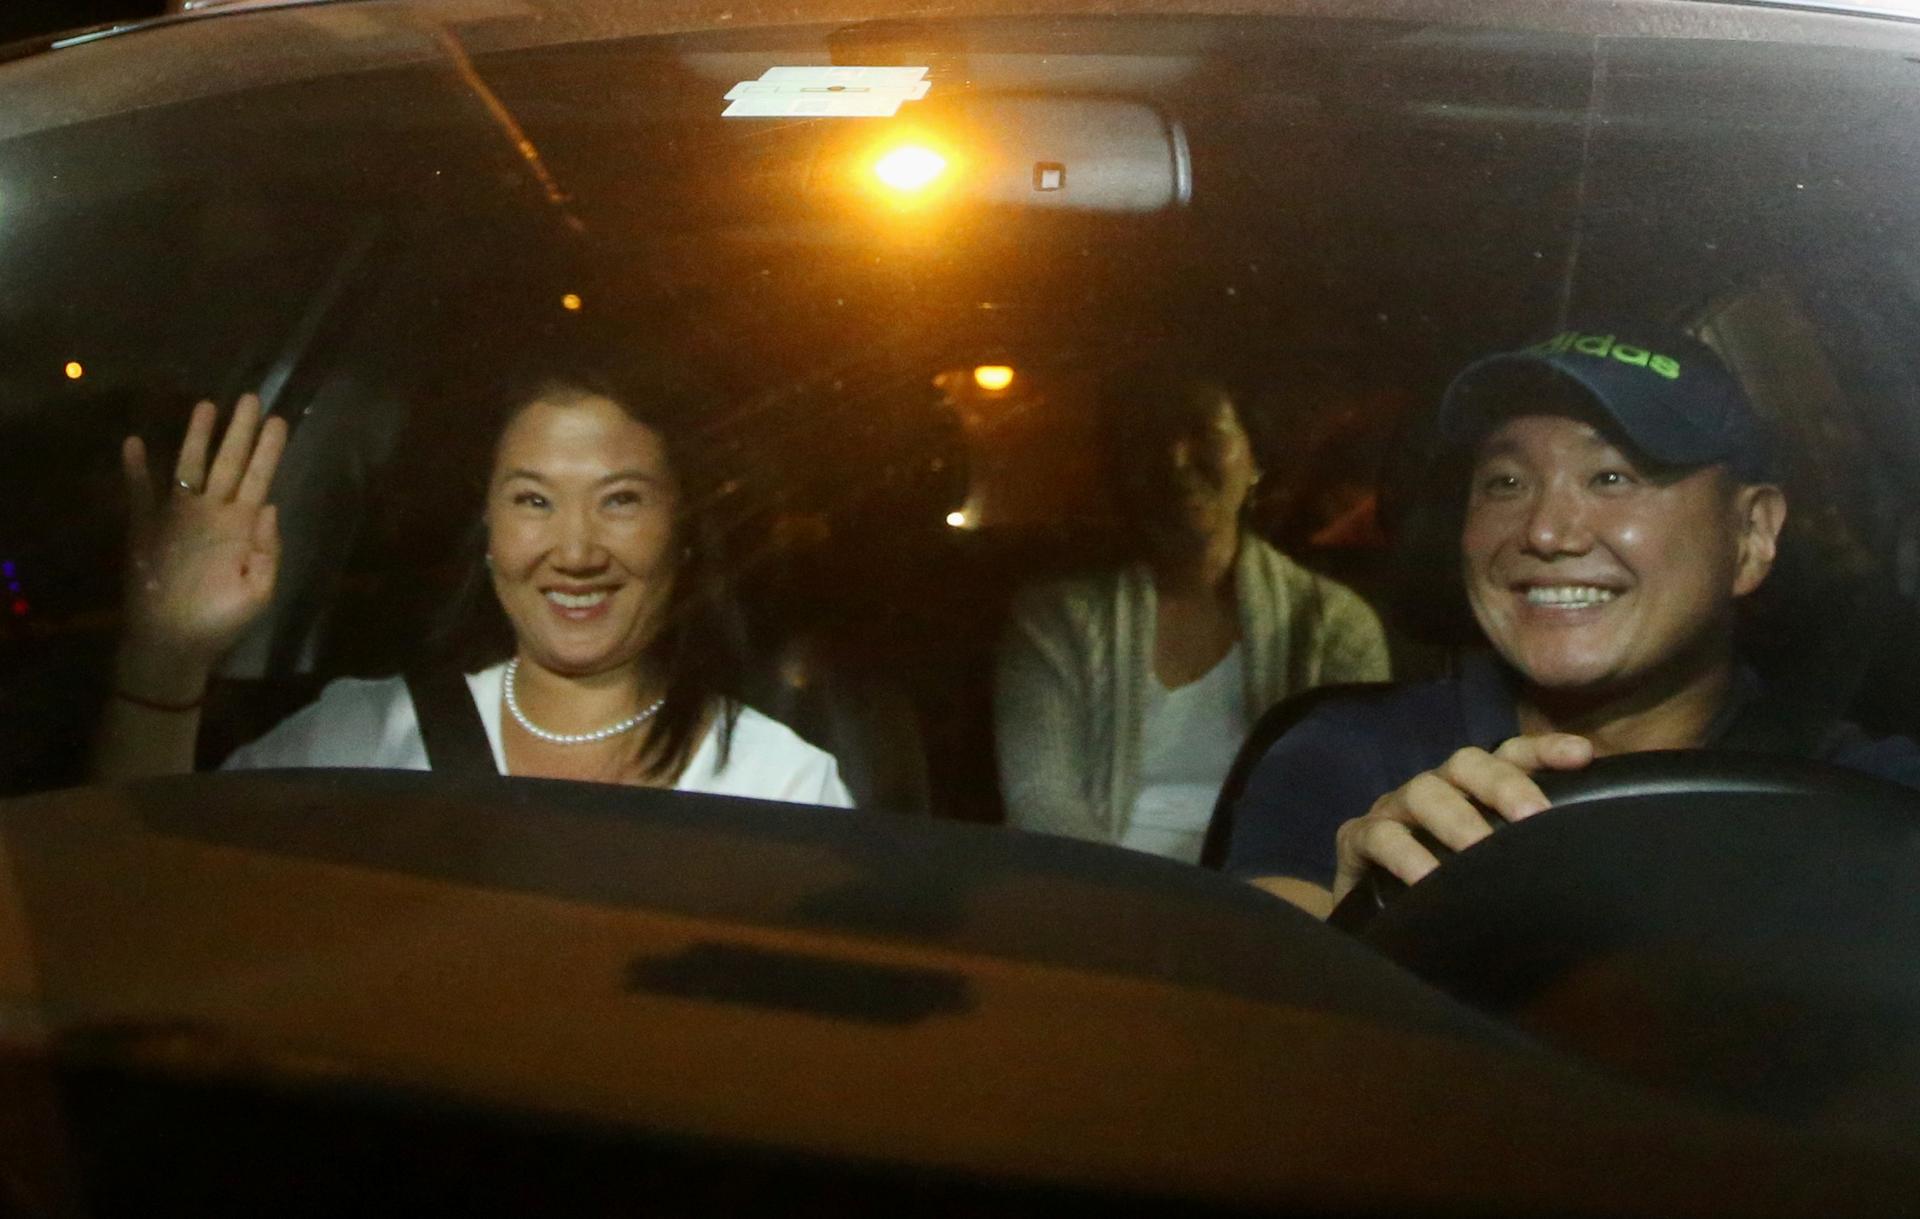 three people inside car, man driving, woman in passenger seat smiling and waving, one more person in back